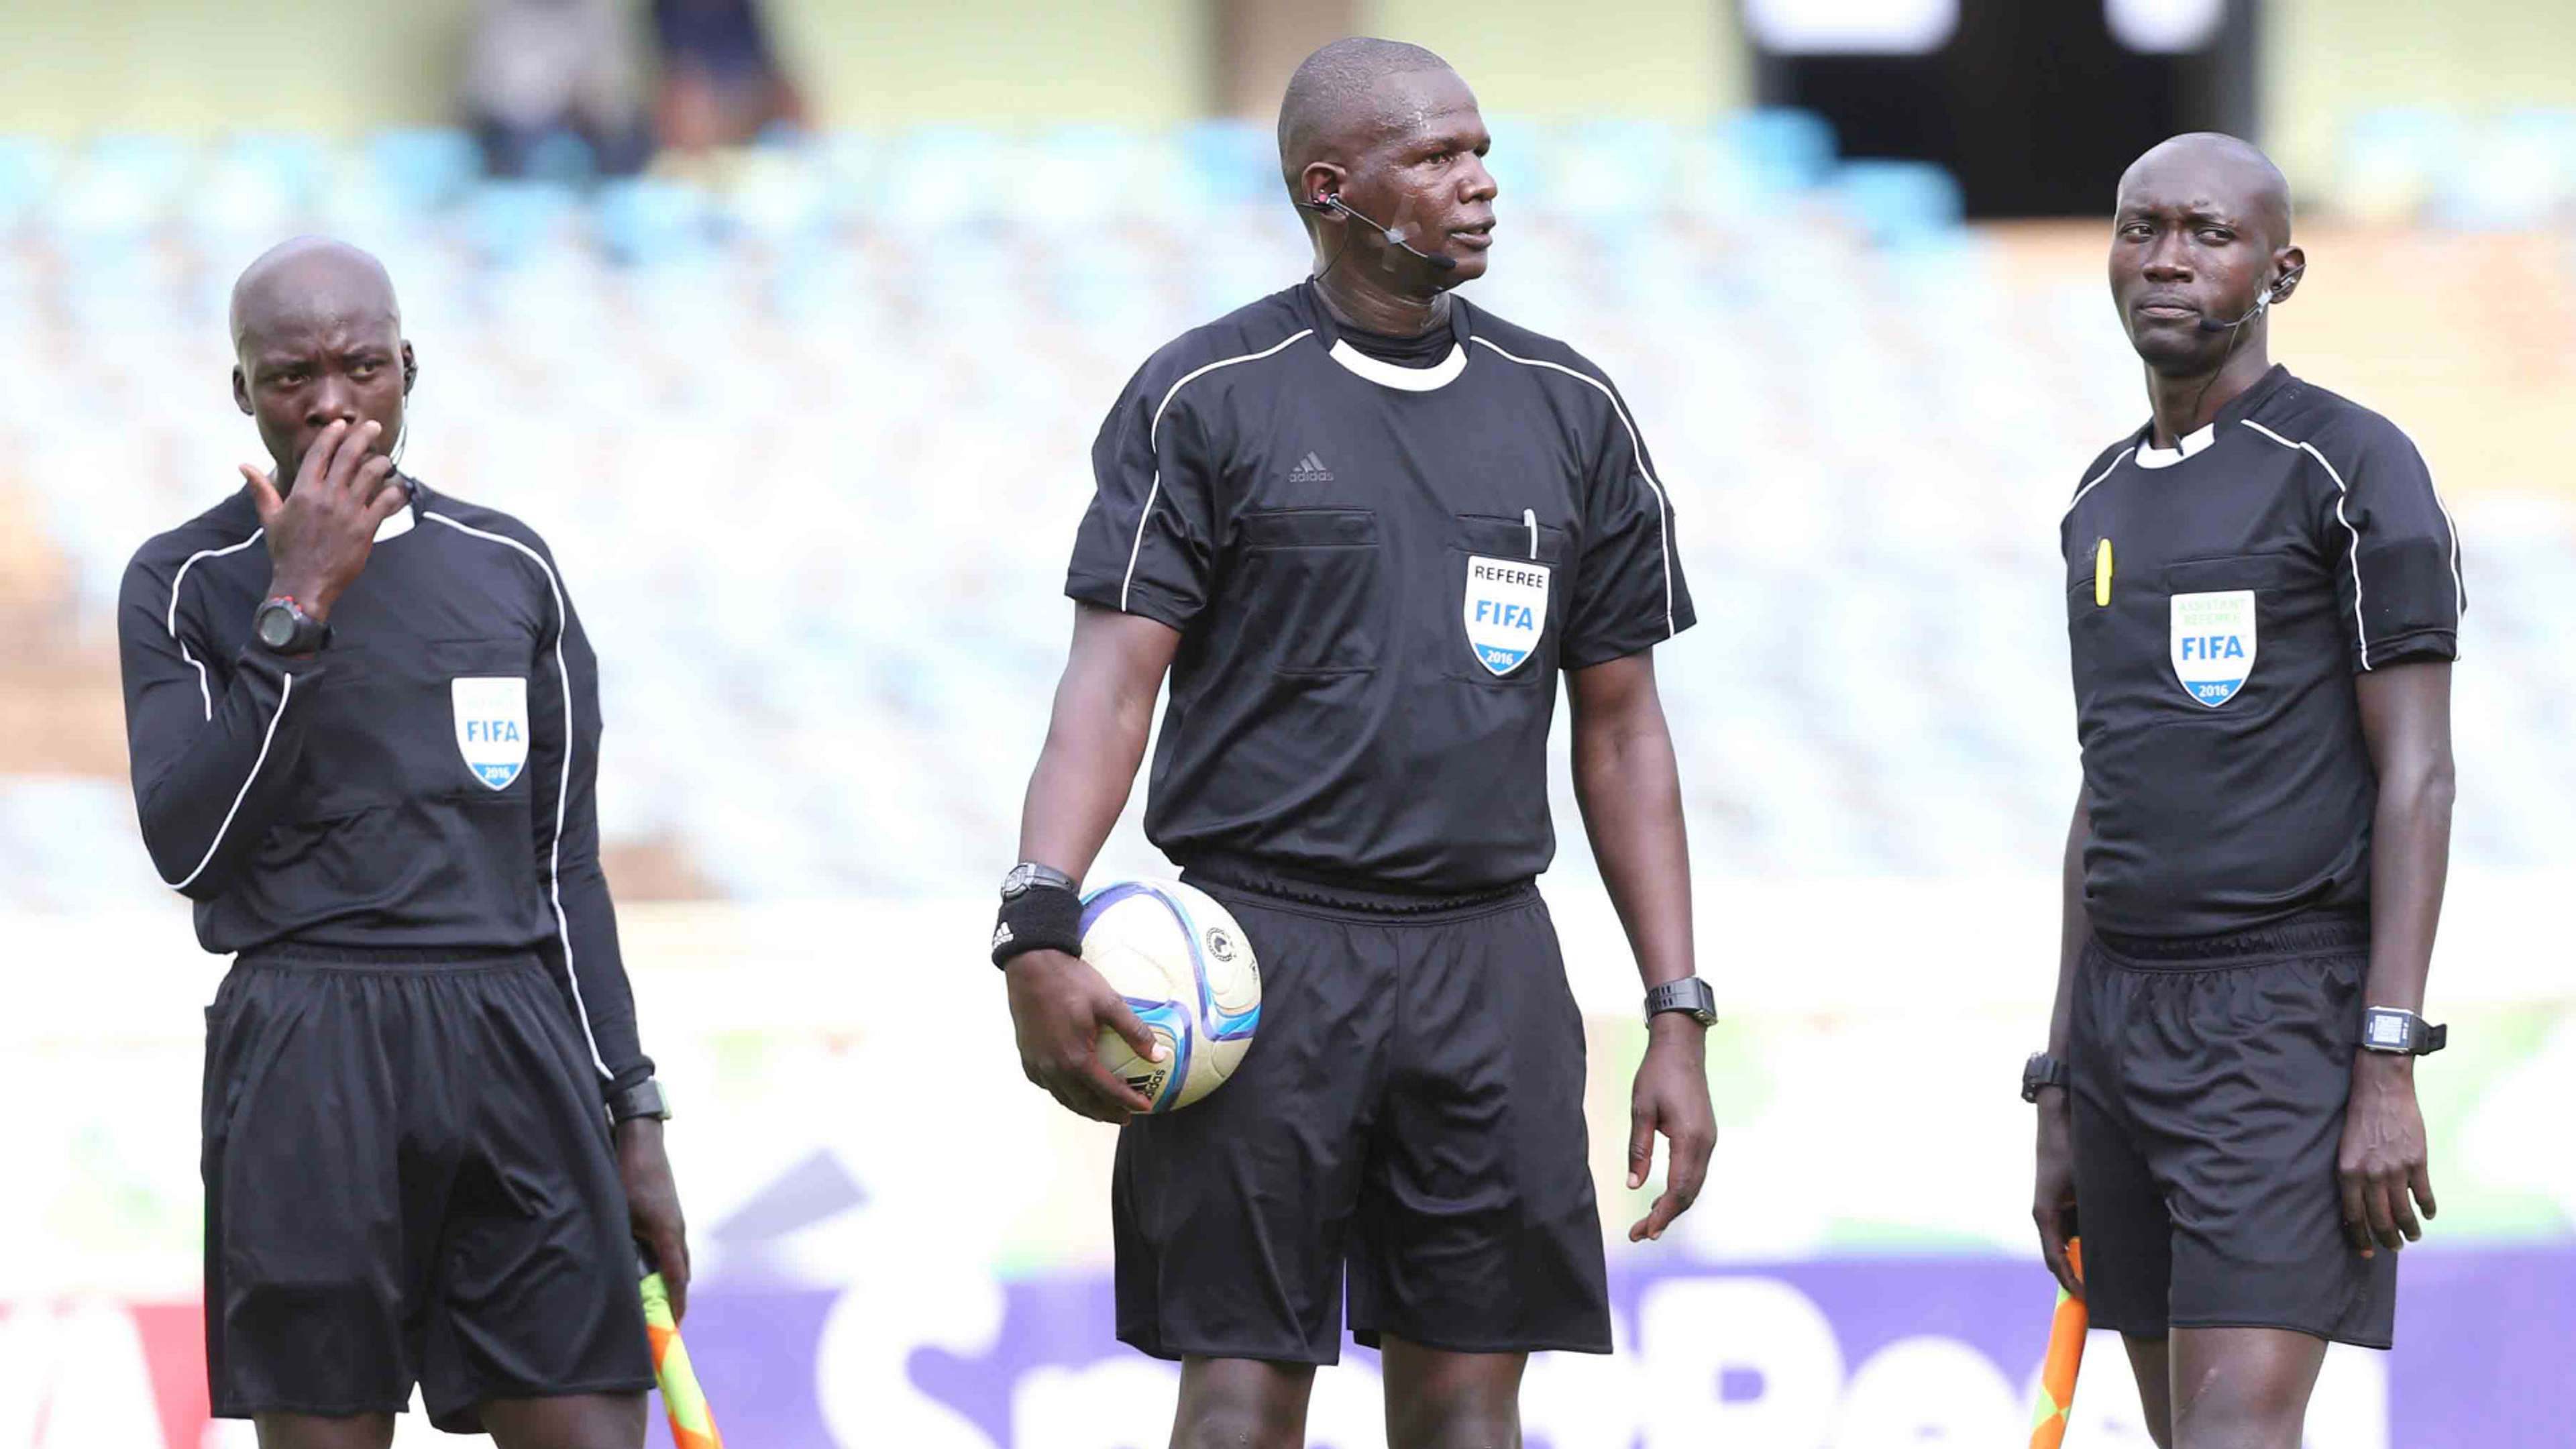 Kenyan referees were in charge of the friendly led by Andrew Juma